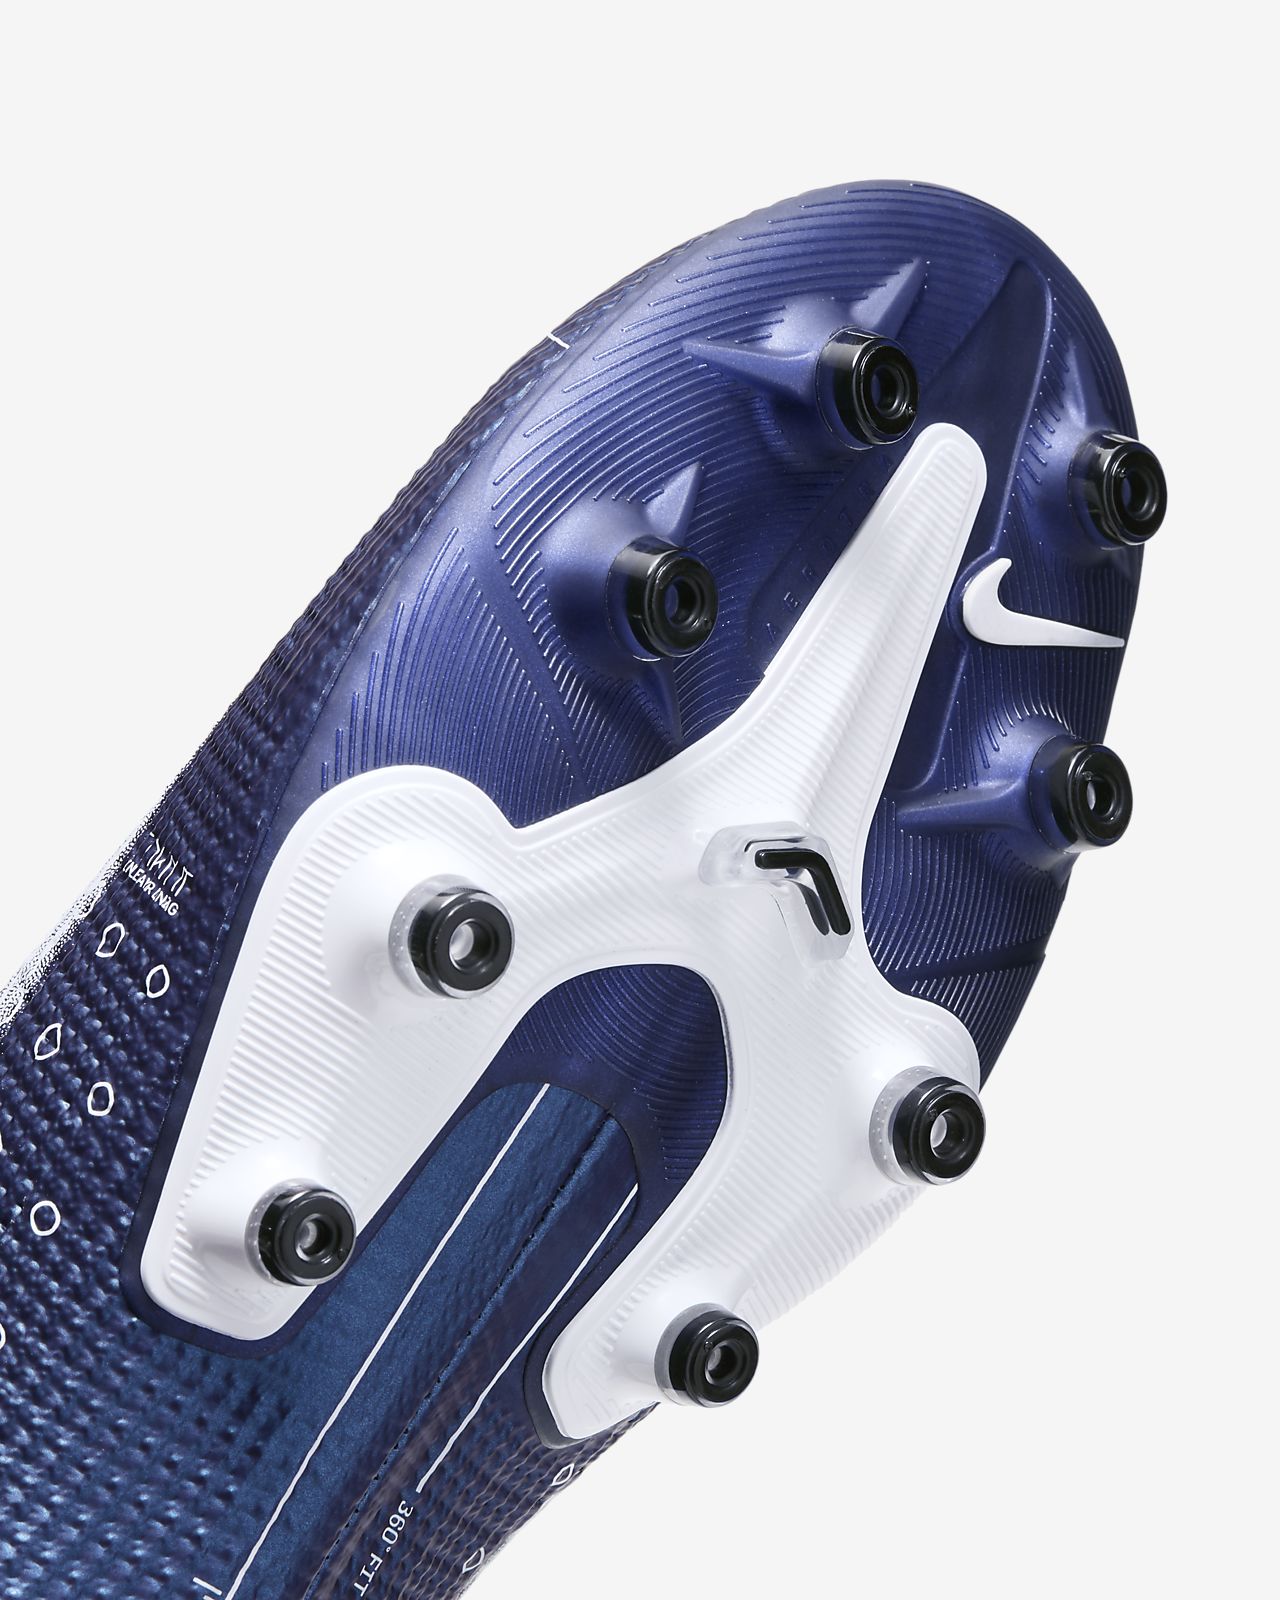 Nike Mercurial Superfly 6 Pro FG Soccer Cleats Soccer .com